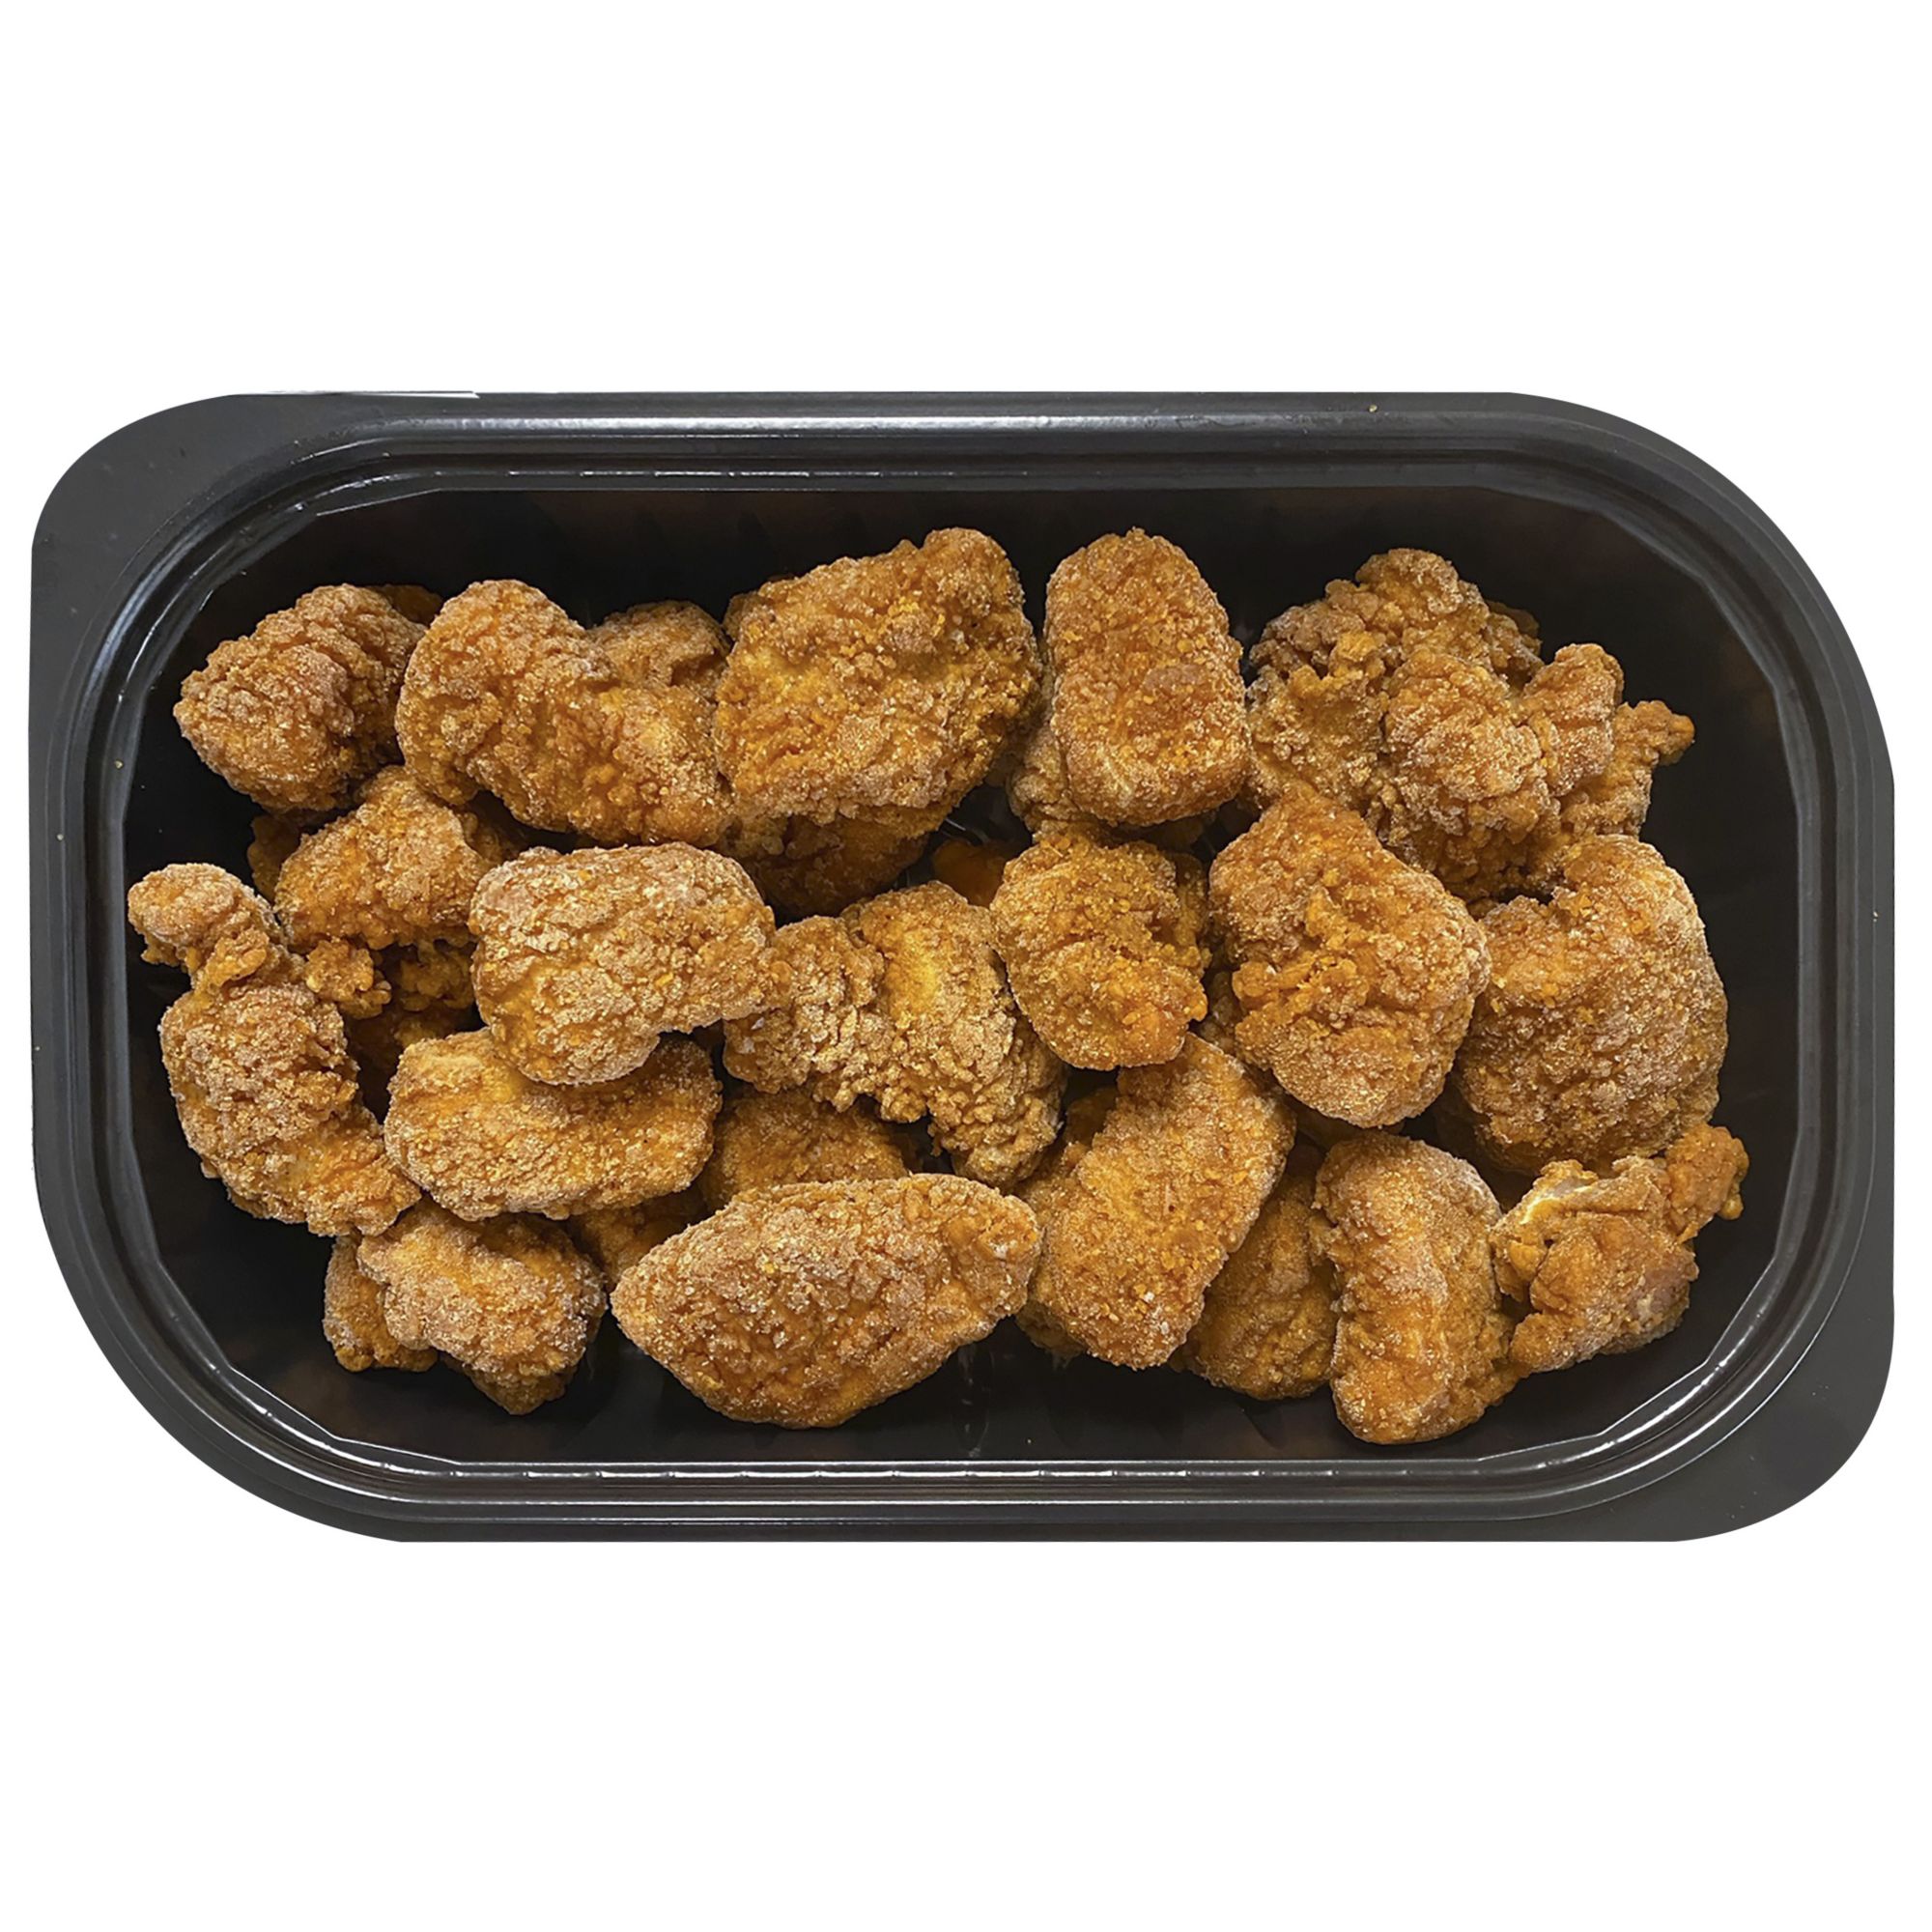 Boneless Wings Lunch Combo (10 ct) - Nearby For Delivery or Pick Up